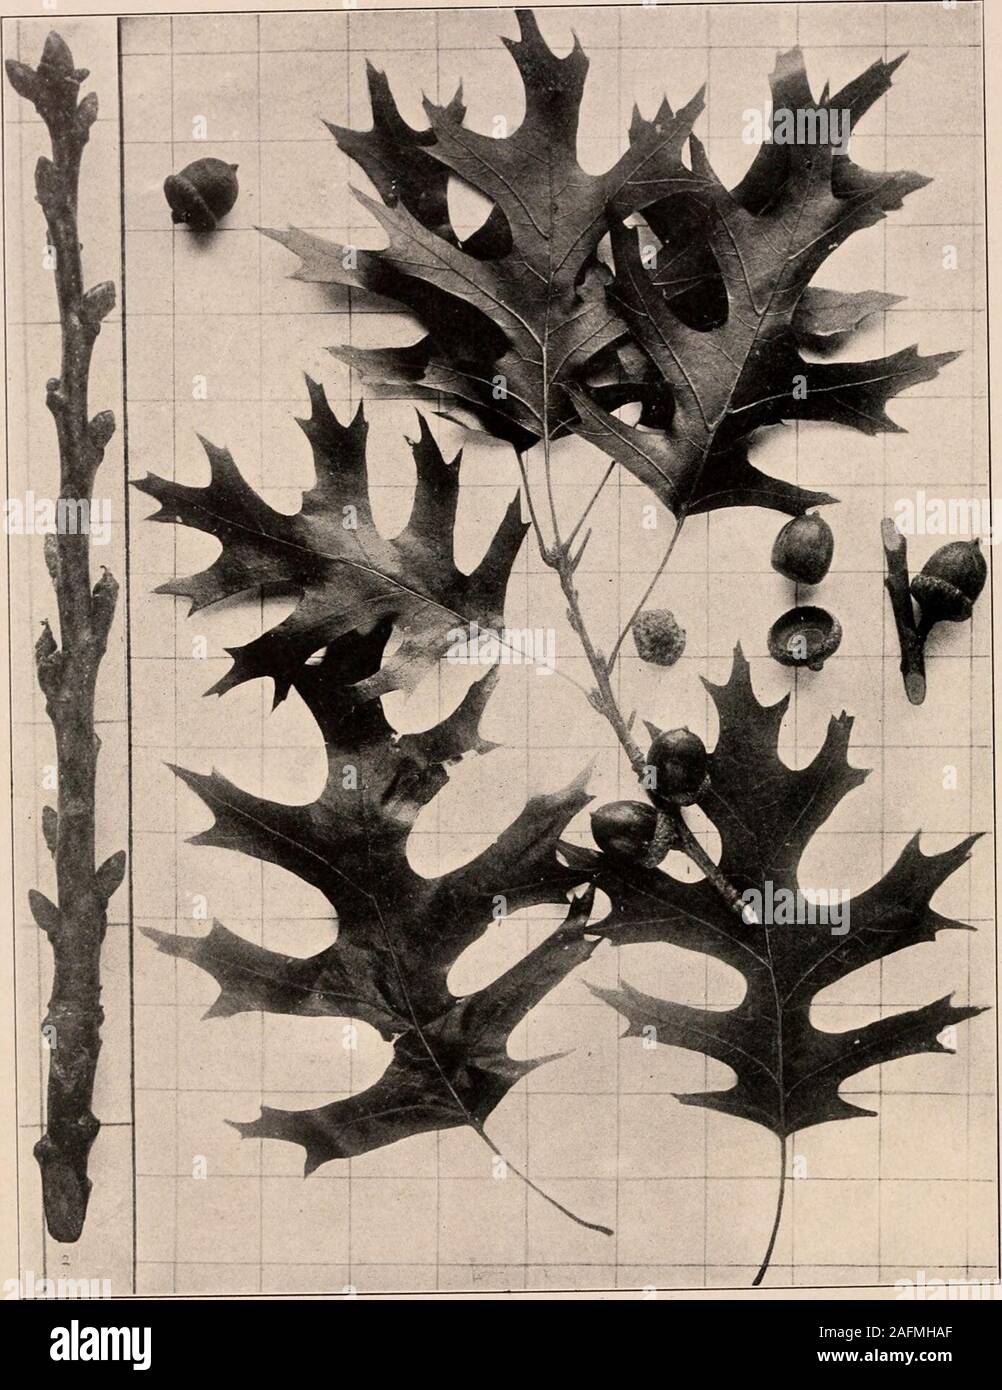 . Handbook of the trees of the northern states and Canada east of the Rocky mountains. Photo-descriptive. SOUTHERN RED OAK. SCHNECKS OAK. Qiiercus Texana Bnckl.^. Fig. i6i. Branchlet with leaves and fruit and young acorns, i ; branchlet in winter bearing younuacorns and leaf-buds. 162. Trunk of tree in Meramec River valley, Mo. Handbook of Trees of the Xortherx States axd Ca^^vda. 141 This tree in tlio ricli bottom-lands of theWabasli River Imsin i&gt; said to attain a lieiiihtof nearly 200 ft., witli sturdy buttressed trunksometimes 7-8 ft. in diameter and 80-00 ft.to its l)ranches — dimensio Stock Photo